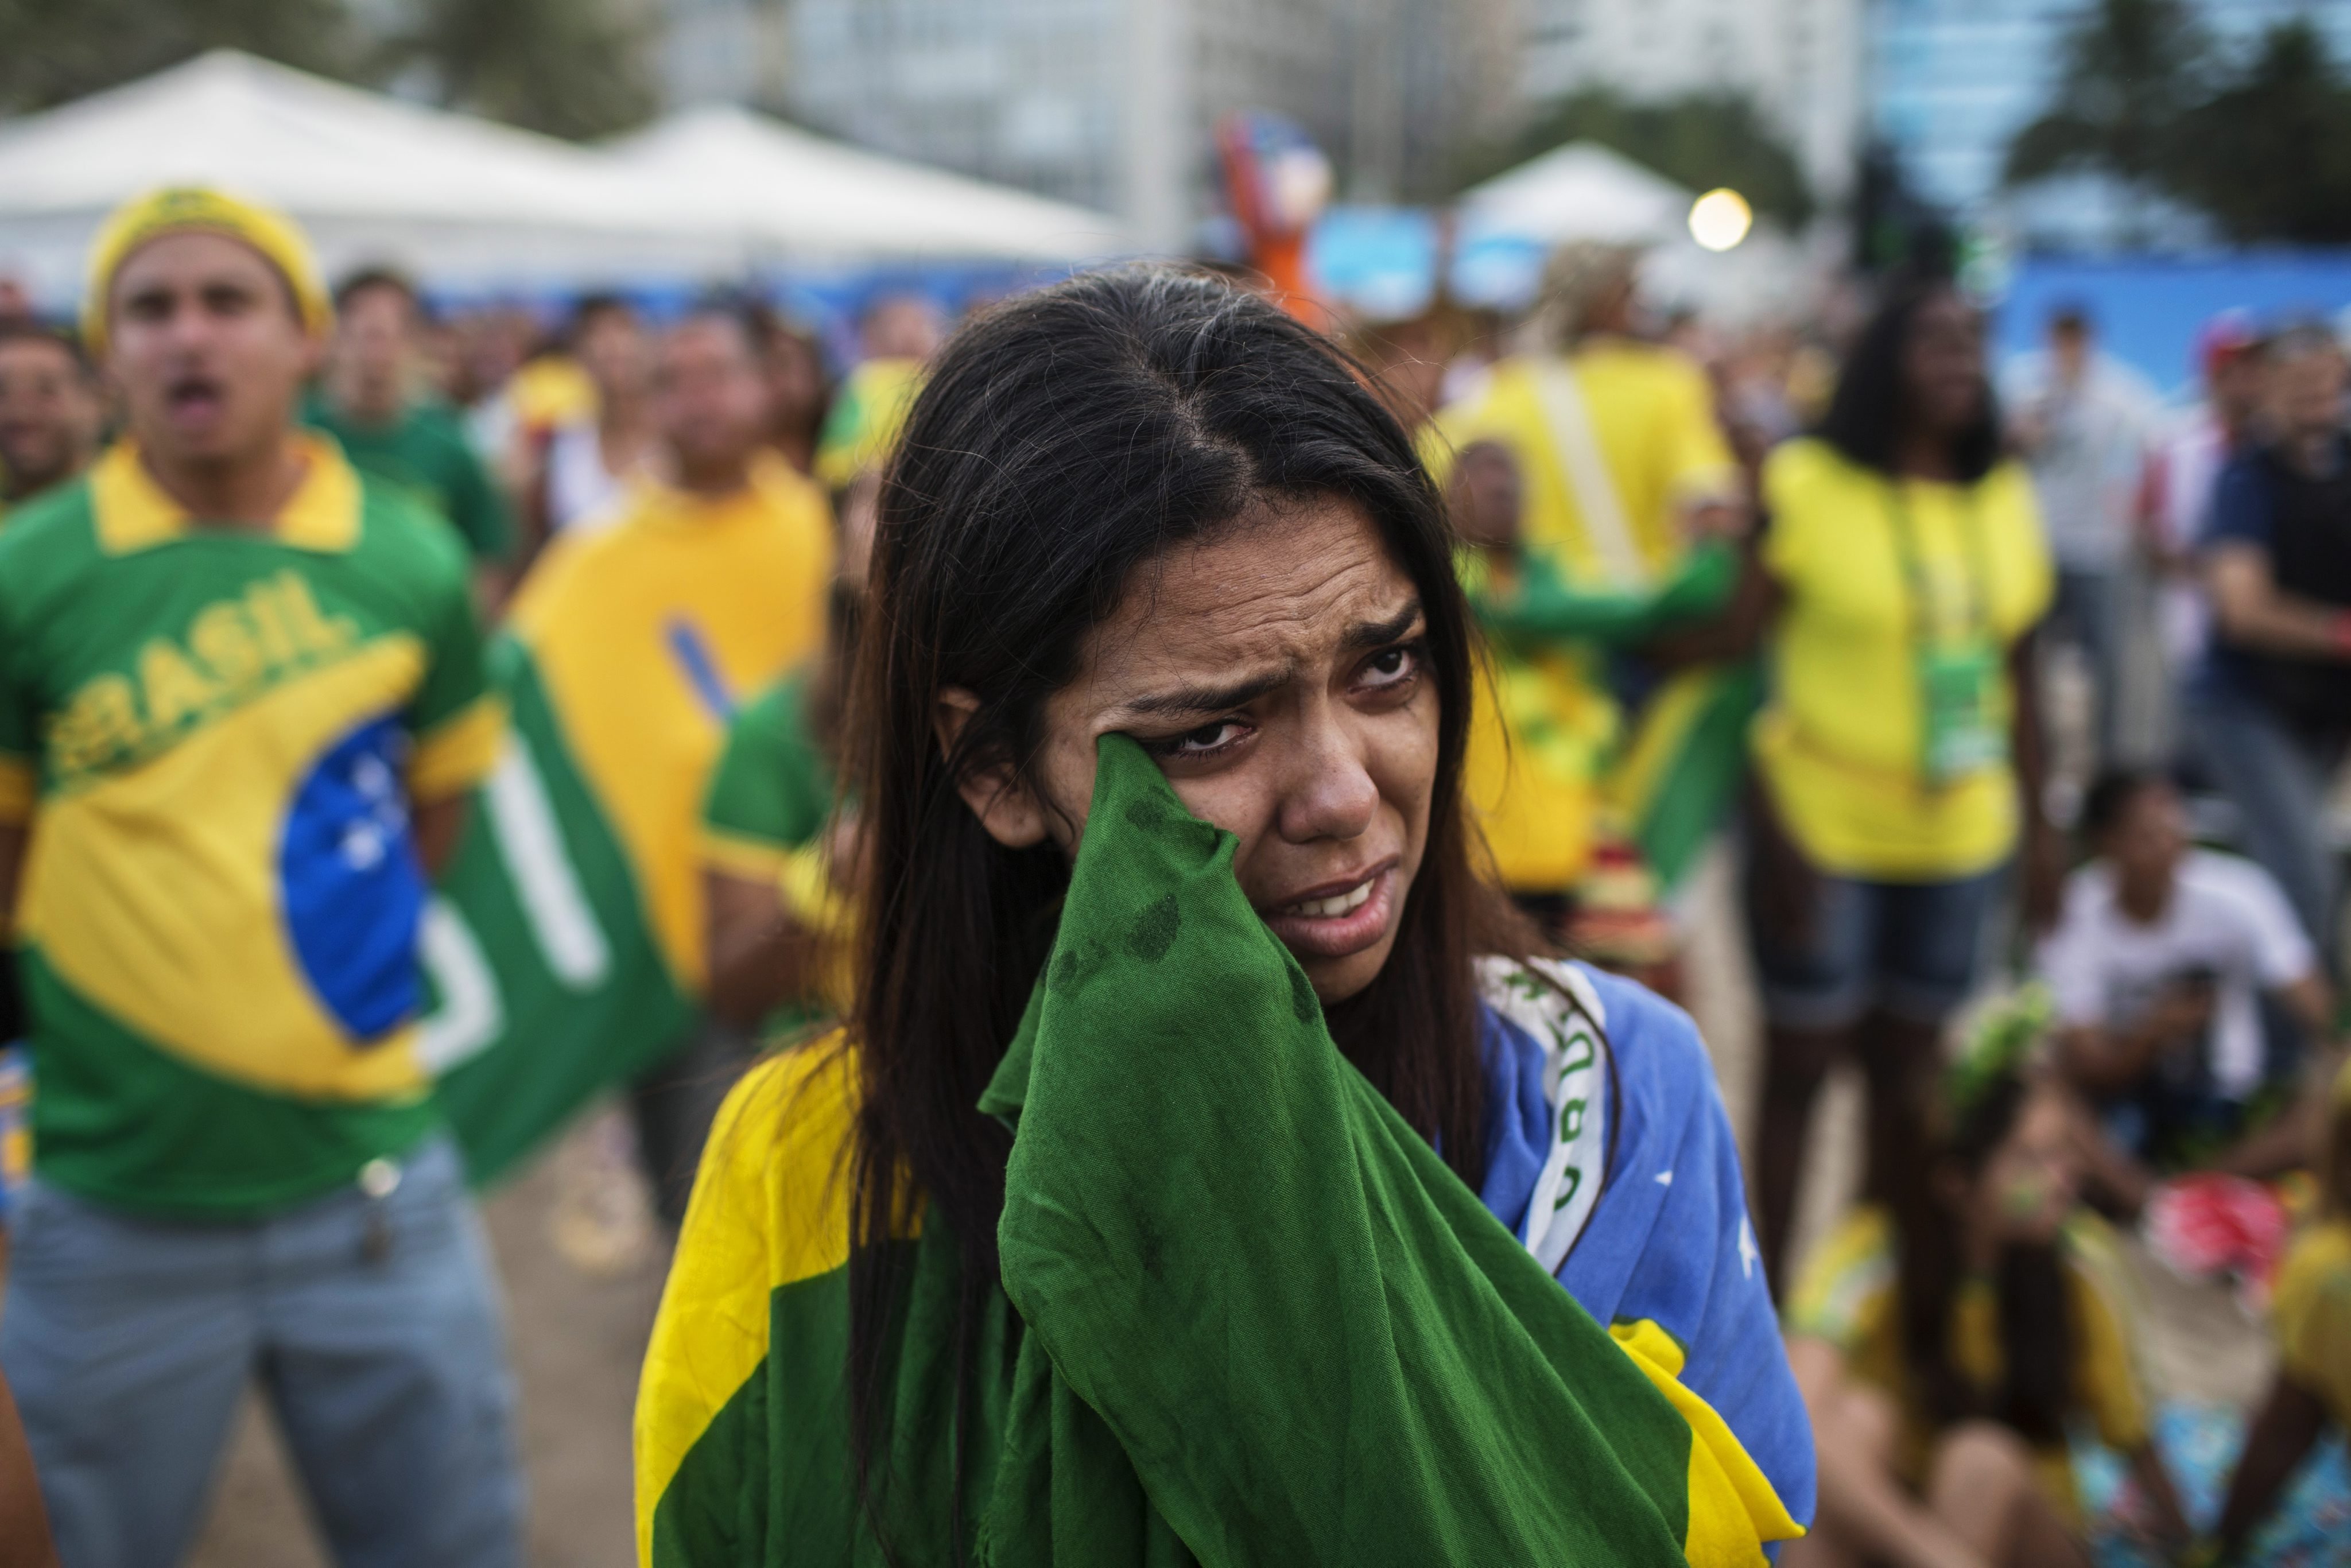 Screaming, Cheering, Crying: Soccer Fans During The World Cup | Time